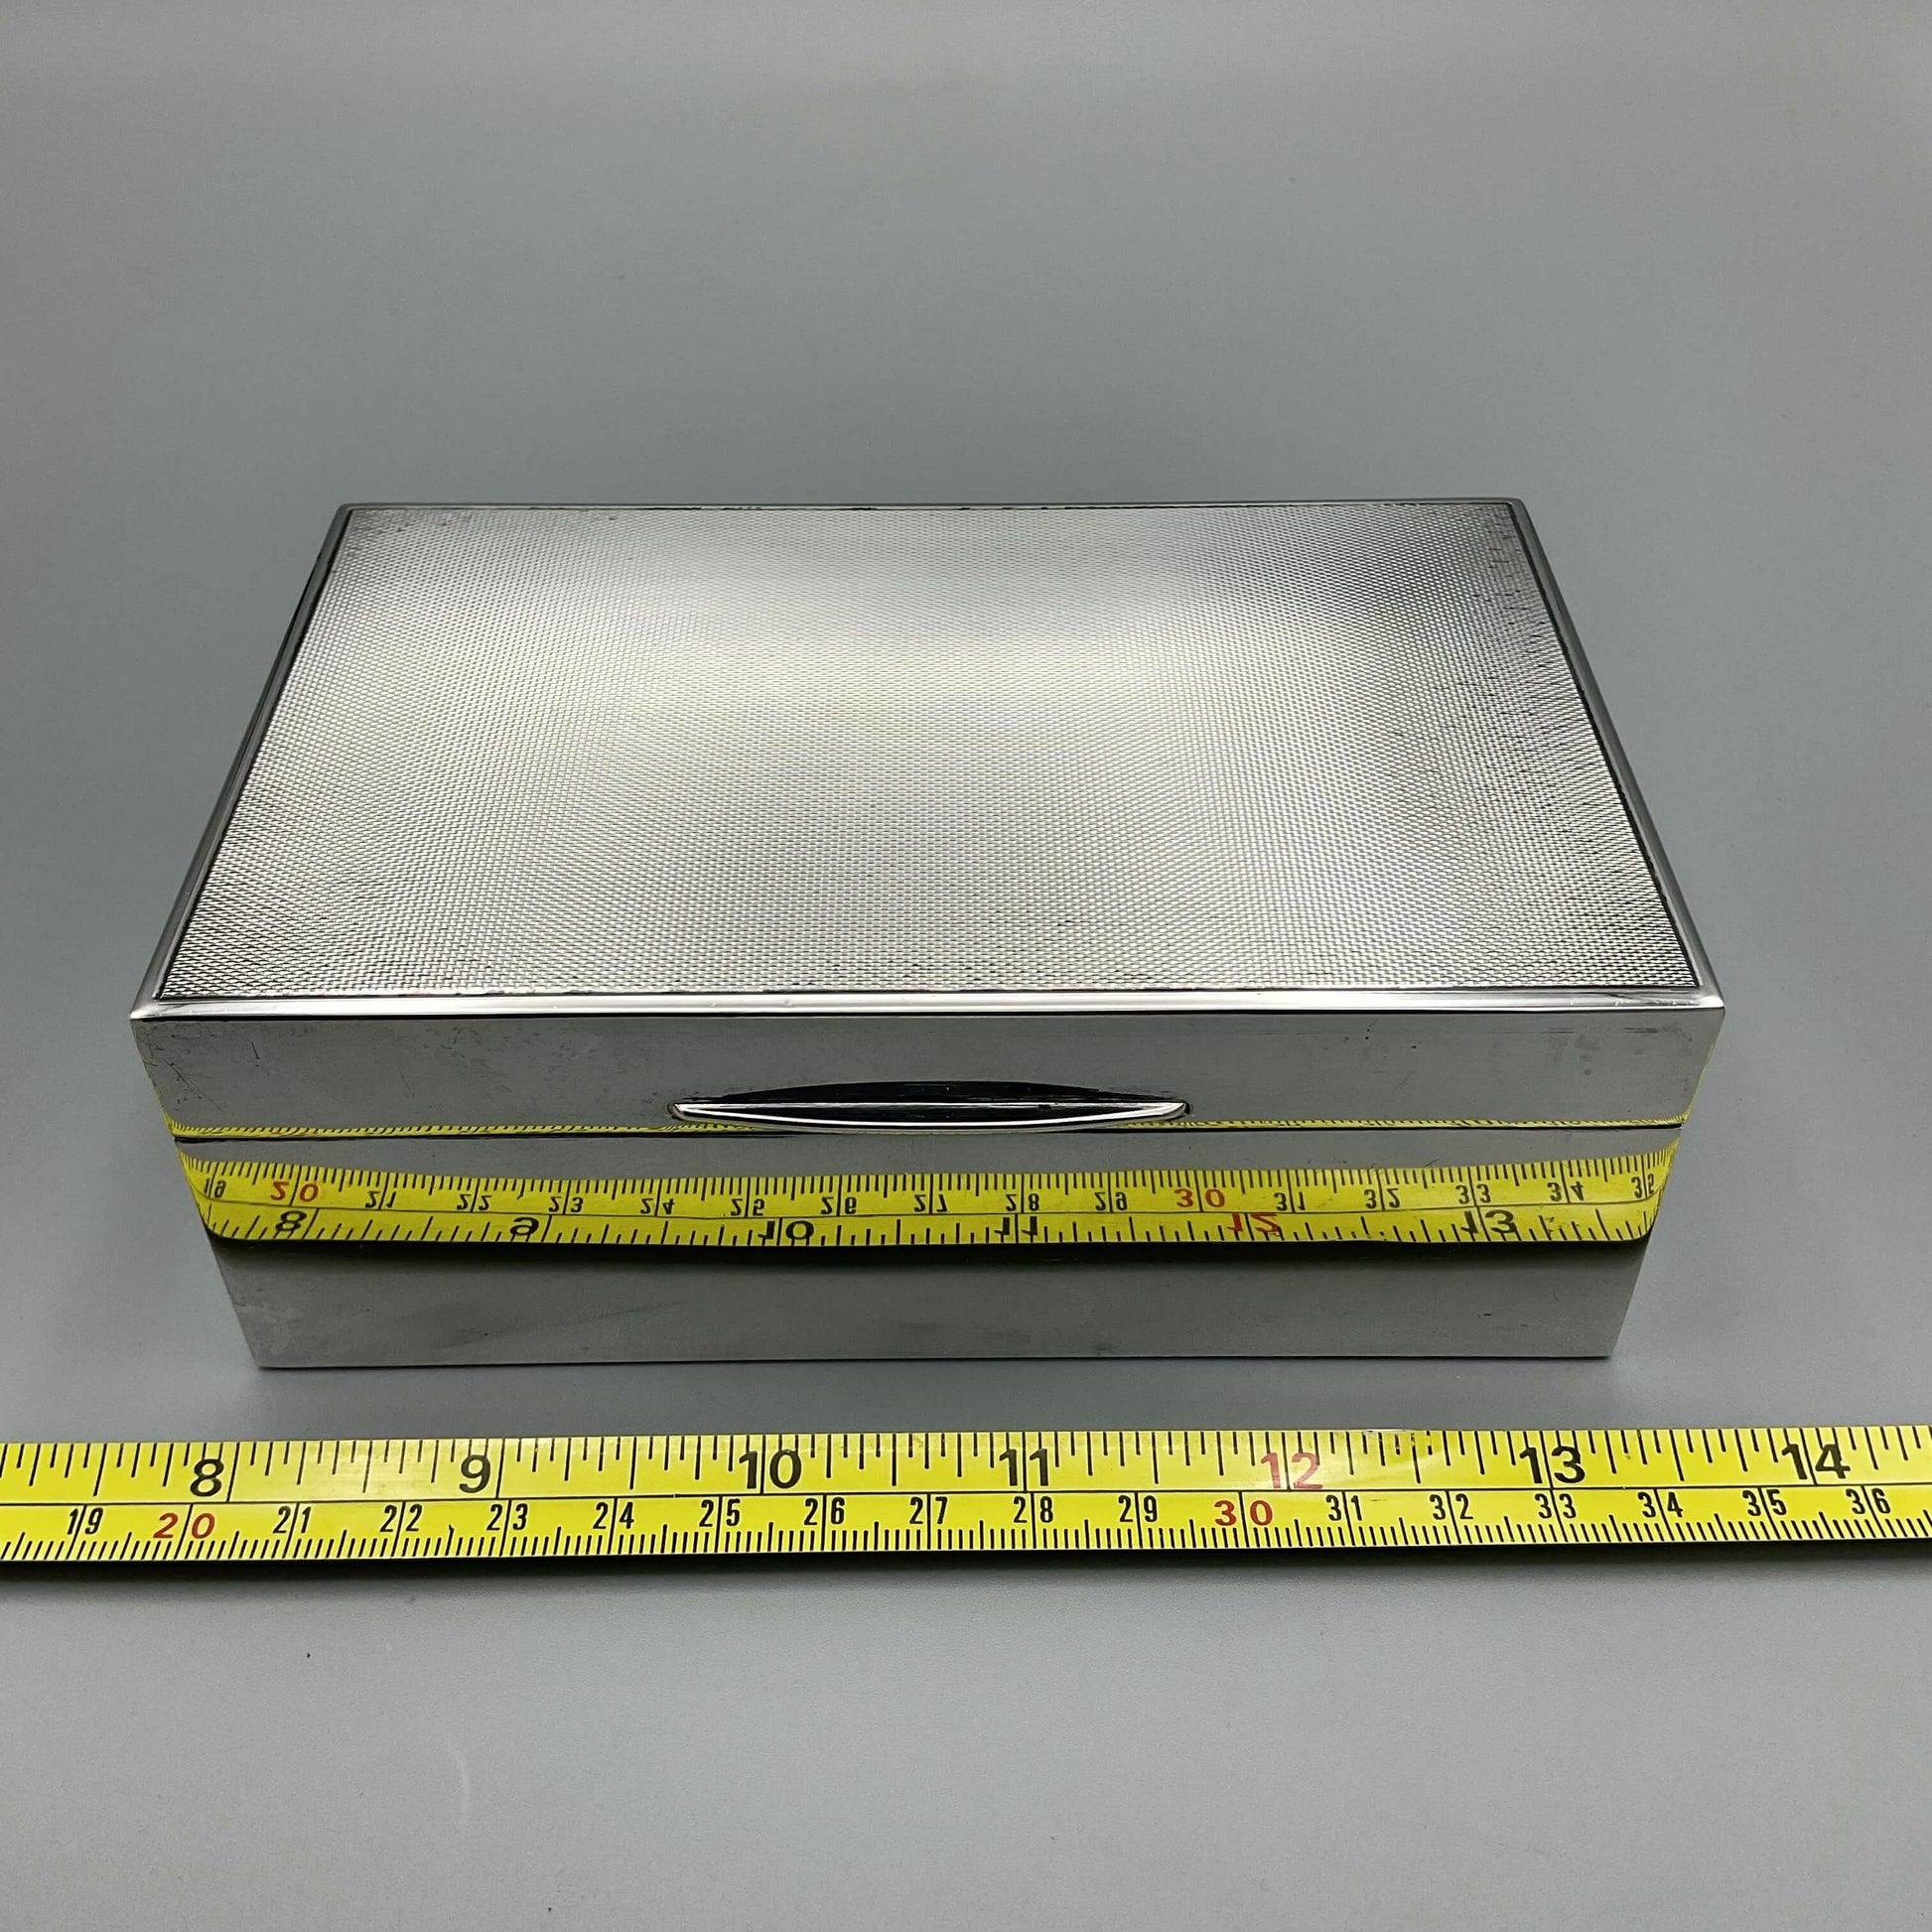 1960s Silver cigarette box next to tape measure showing width as approx 14cm